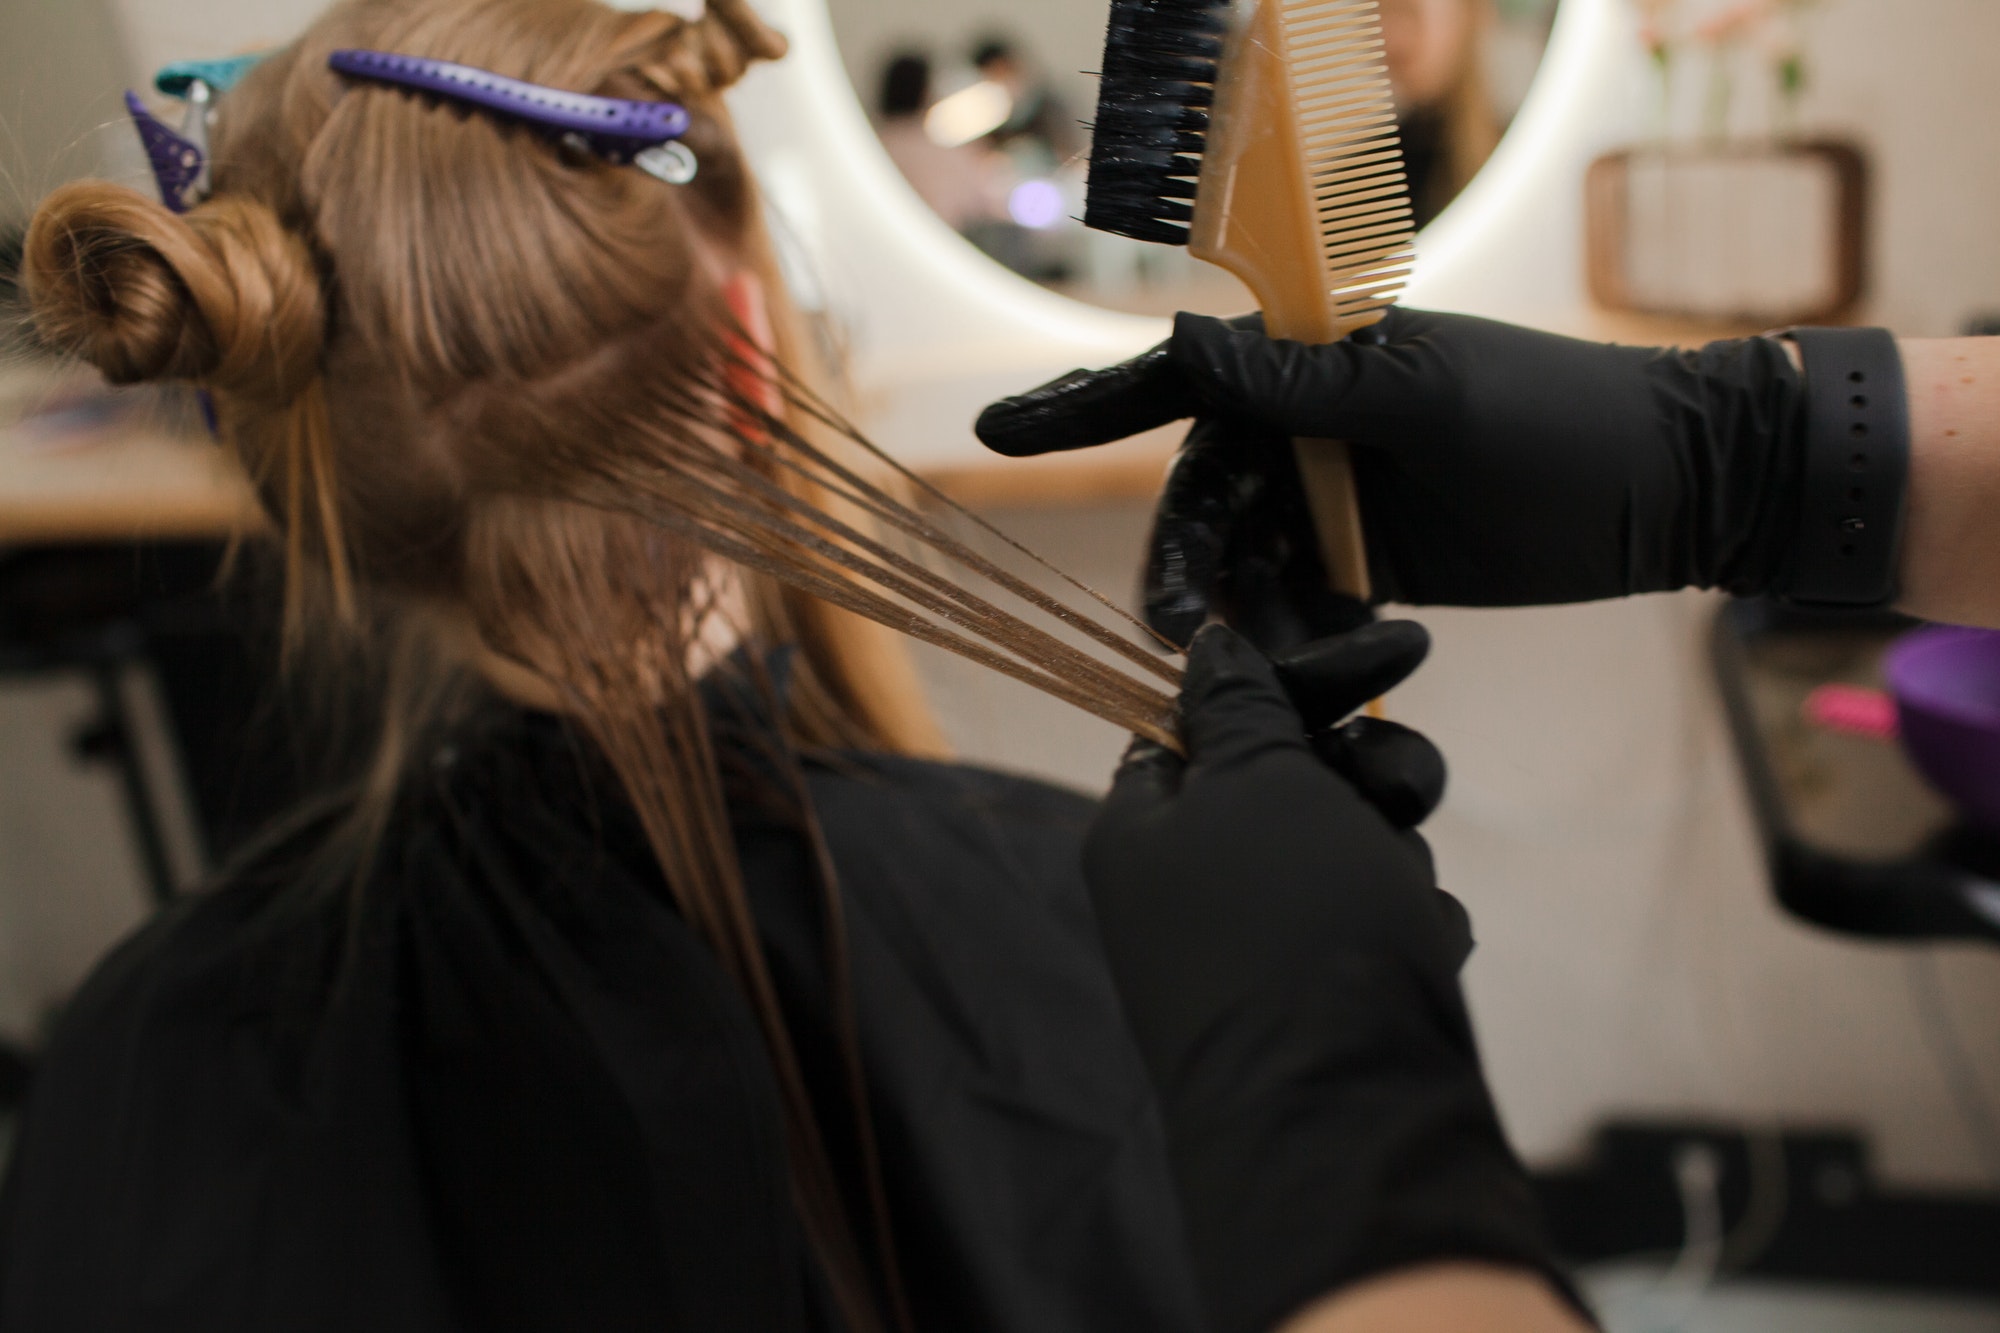 The hairdresser paints or makes keratin to a girl in a professional salon